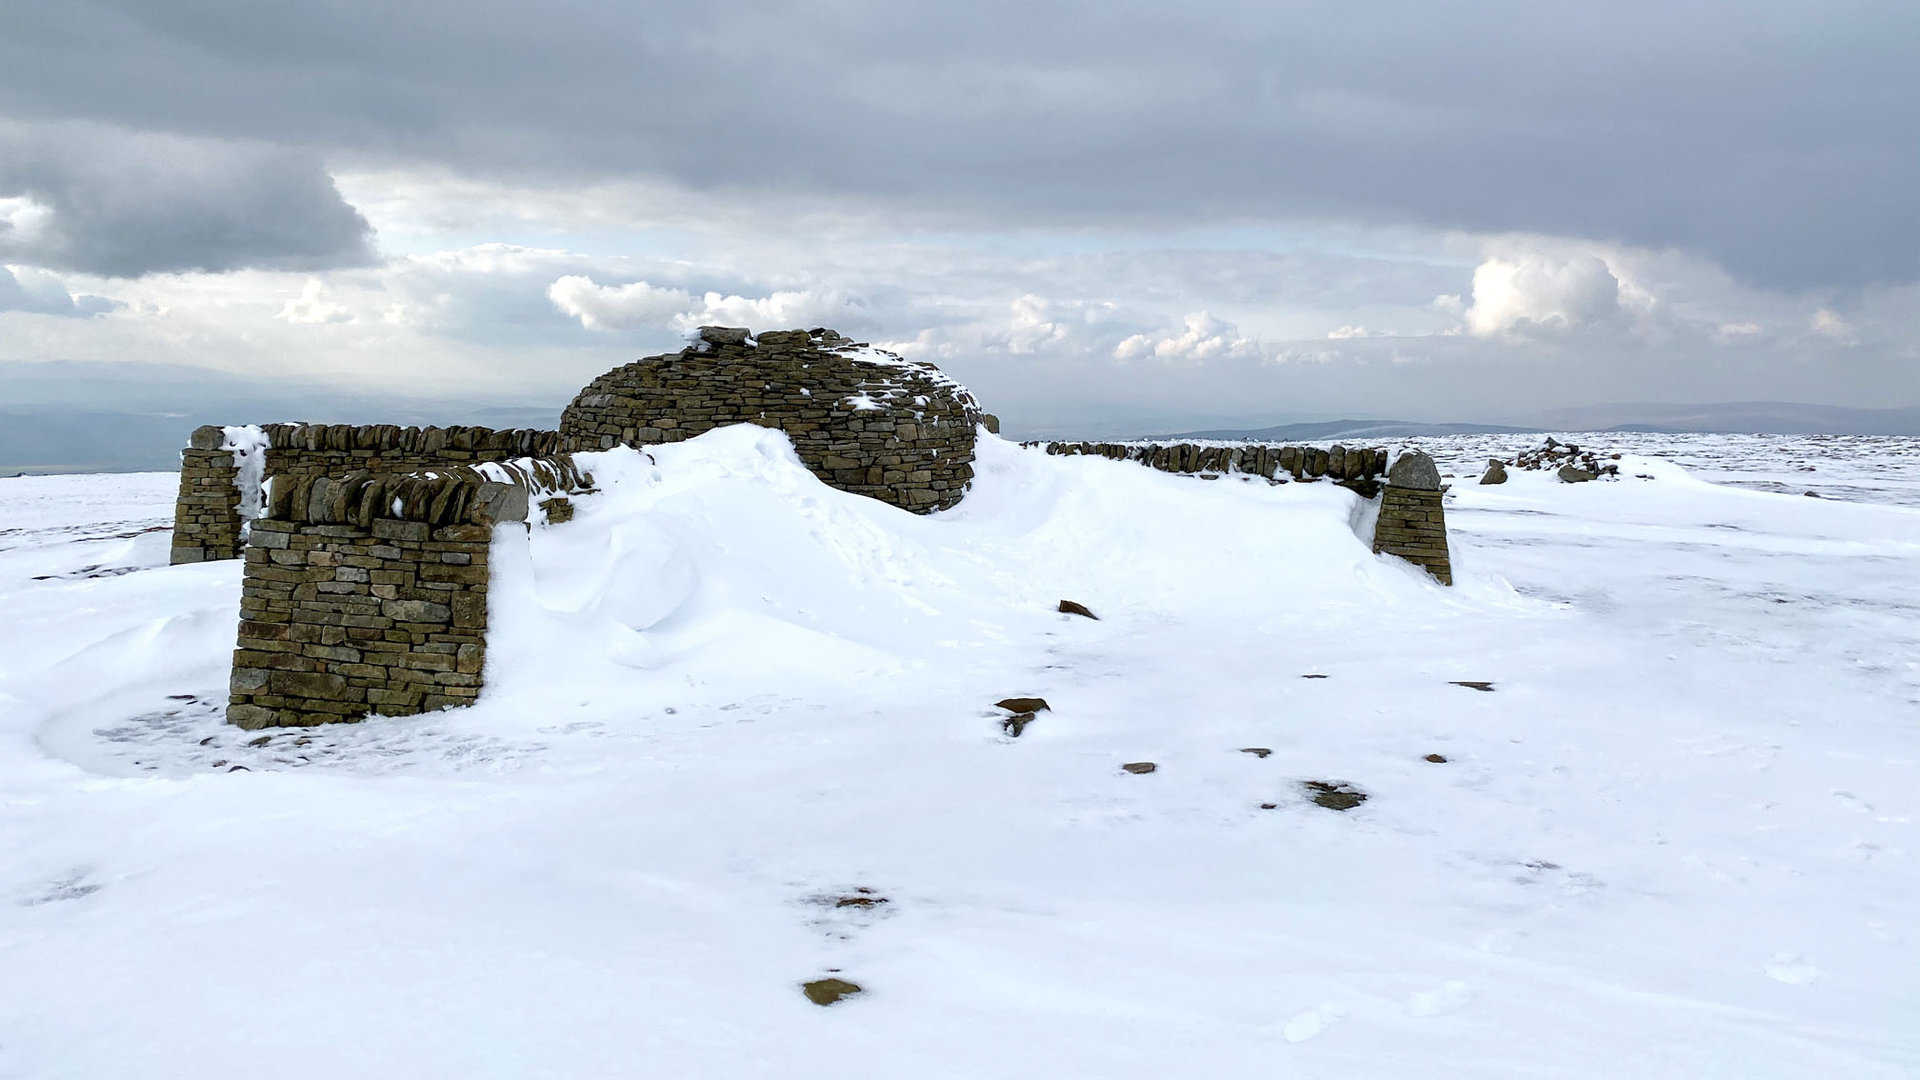 Shelter and seating area on Cross Fell completely filled with snow. This is the halfway point of this Cross Fell walk.